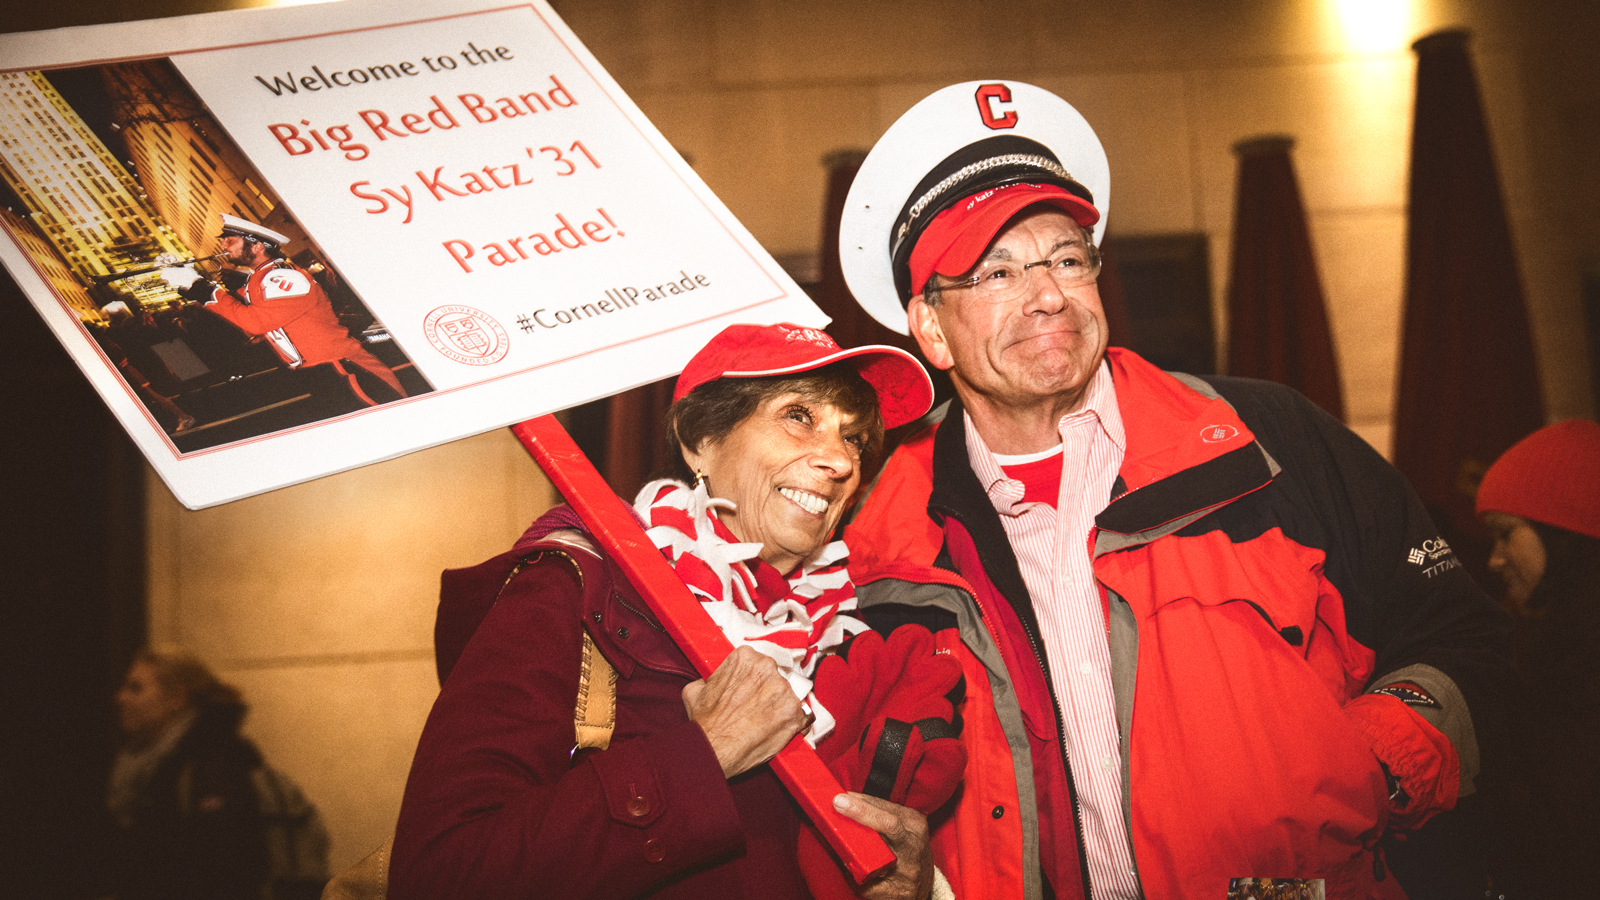 Cornell fans gather in New York City for the Sy Katz Parade